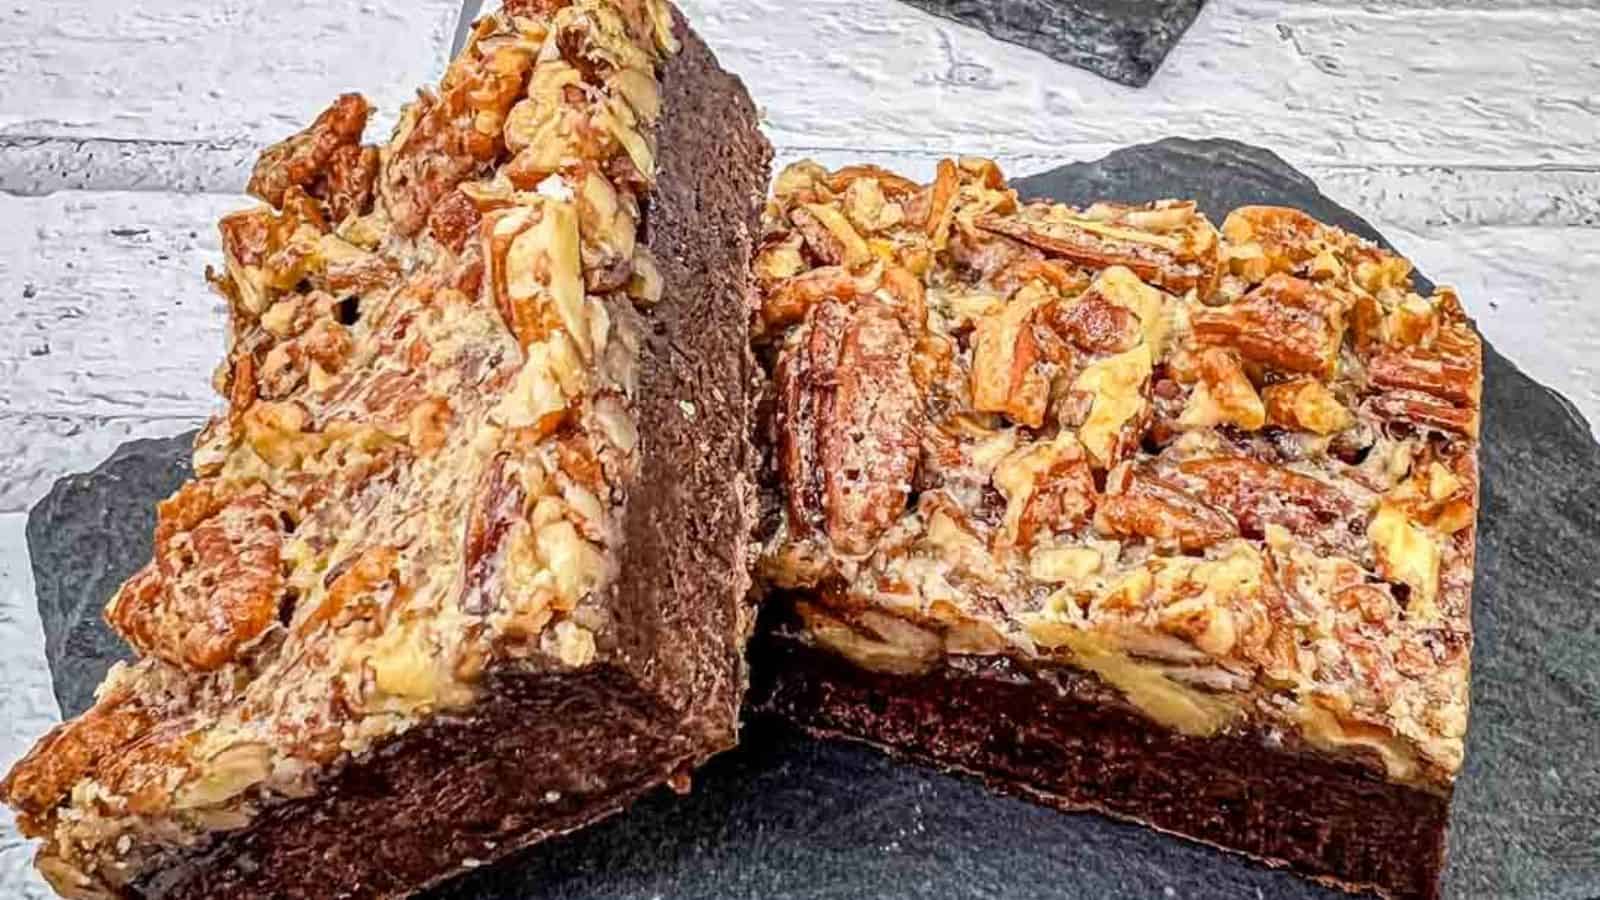 A close-up of two pecan brownies on a slate surface, showing the rich, chocolatey interior and a topping of chopped pecans.